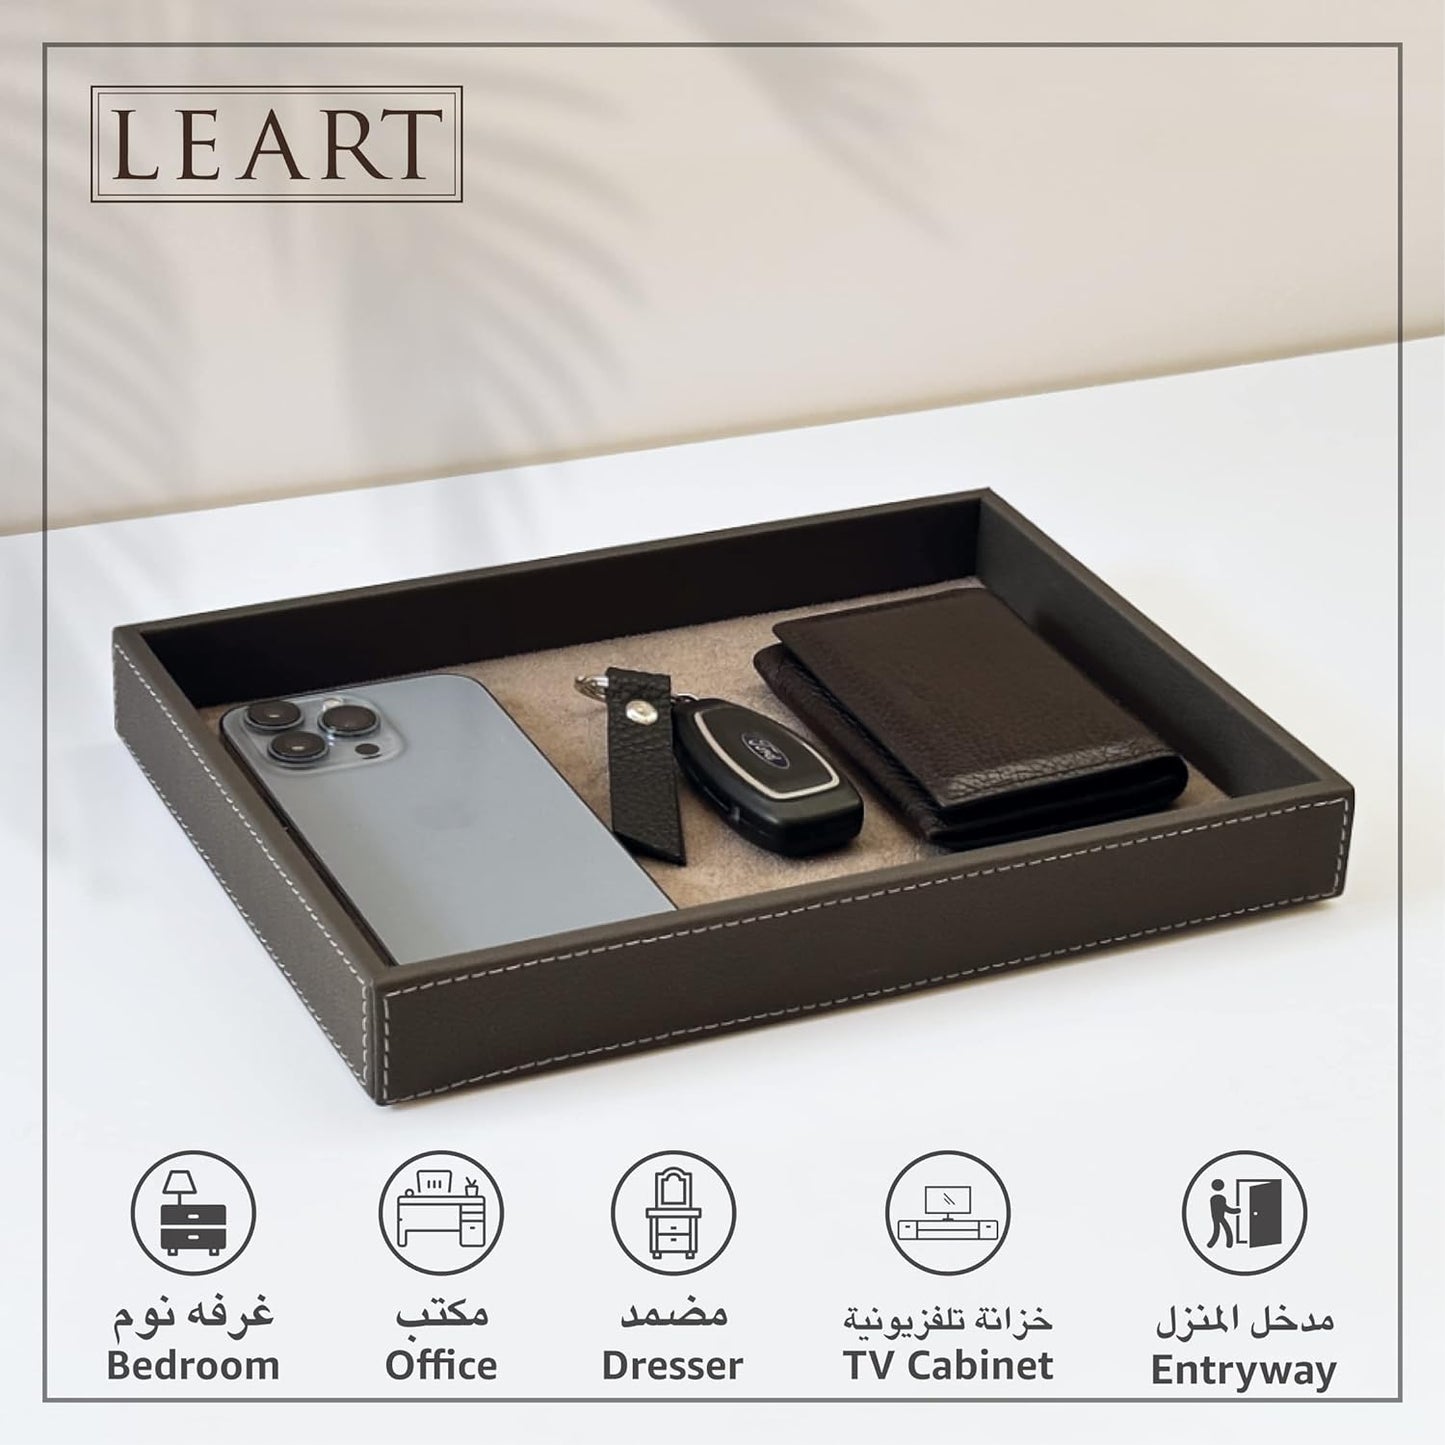 LEART Valet Tray for Men & Women – Leather Tray Organizer | Bedside, Nightstand, Office Desk Organizer Tray | Catchall Tray (Black)